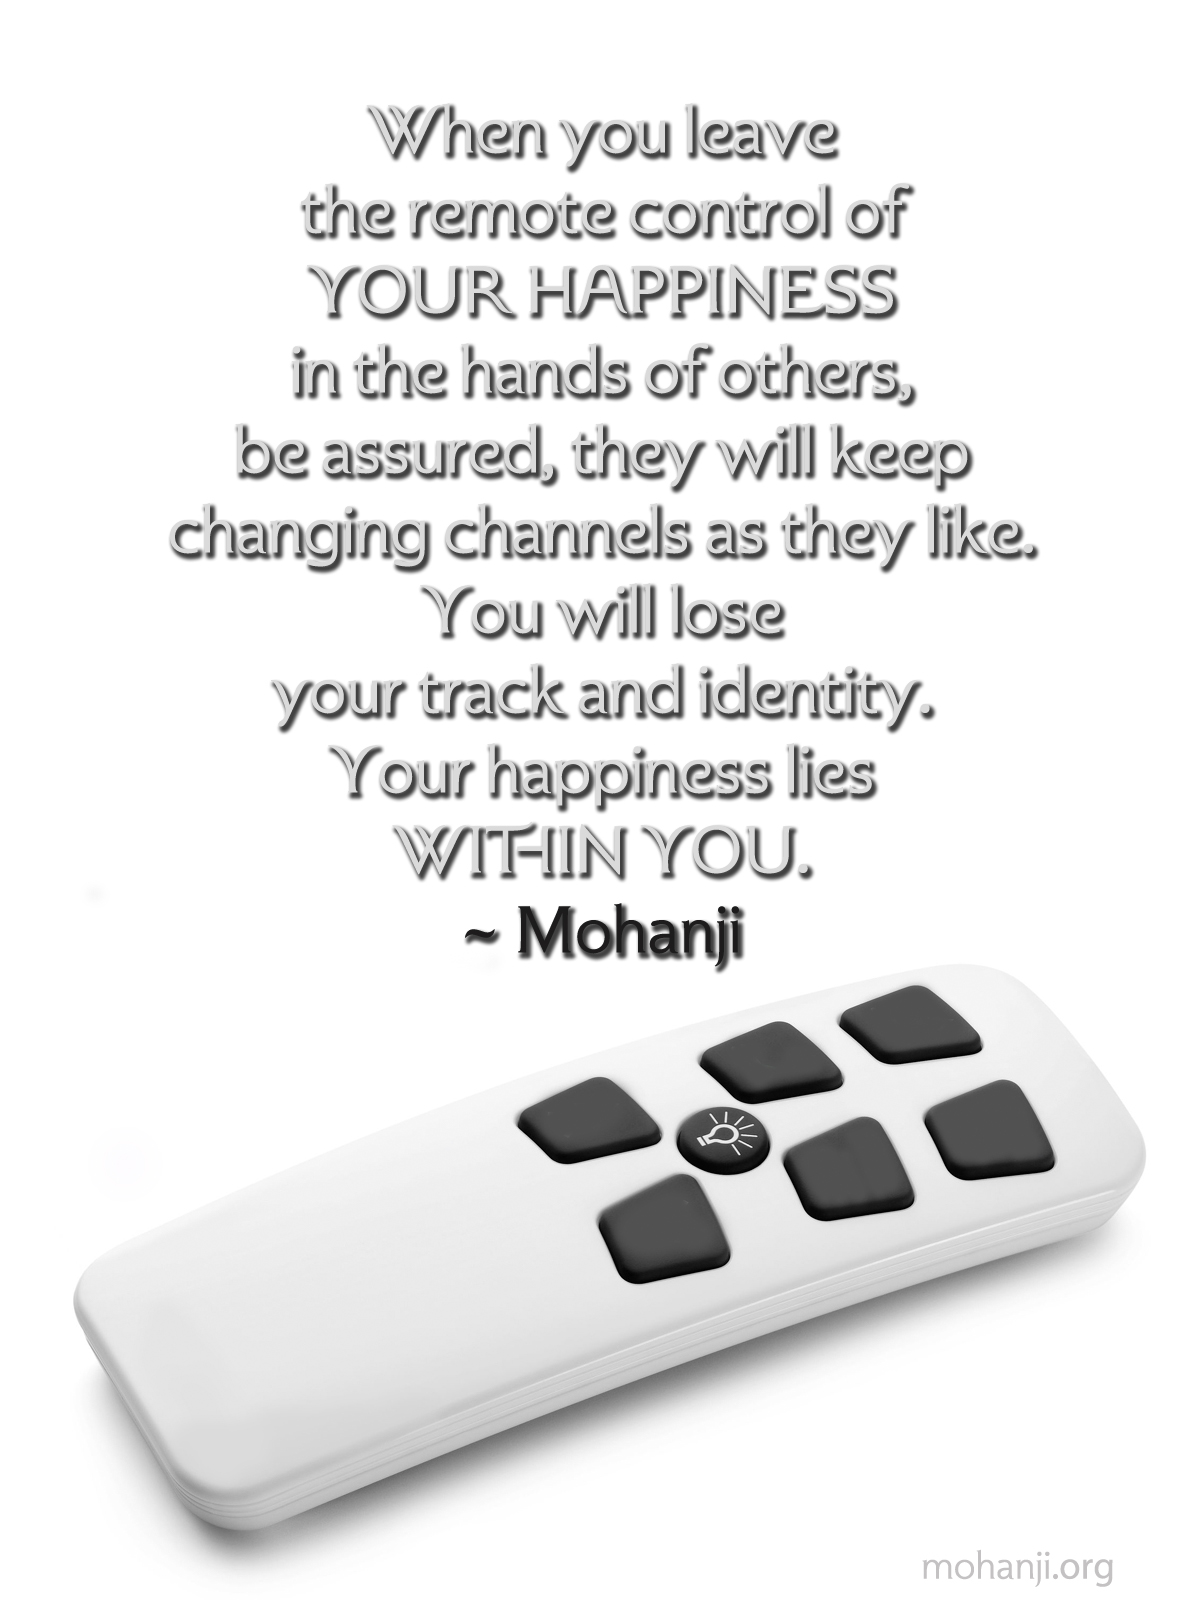 Mohanji quote - When you leave the remote control of your happiness